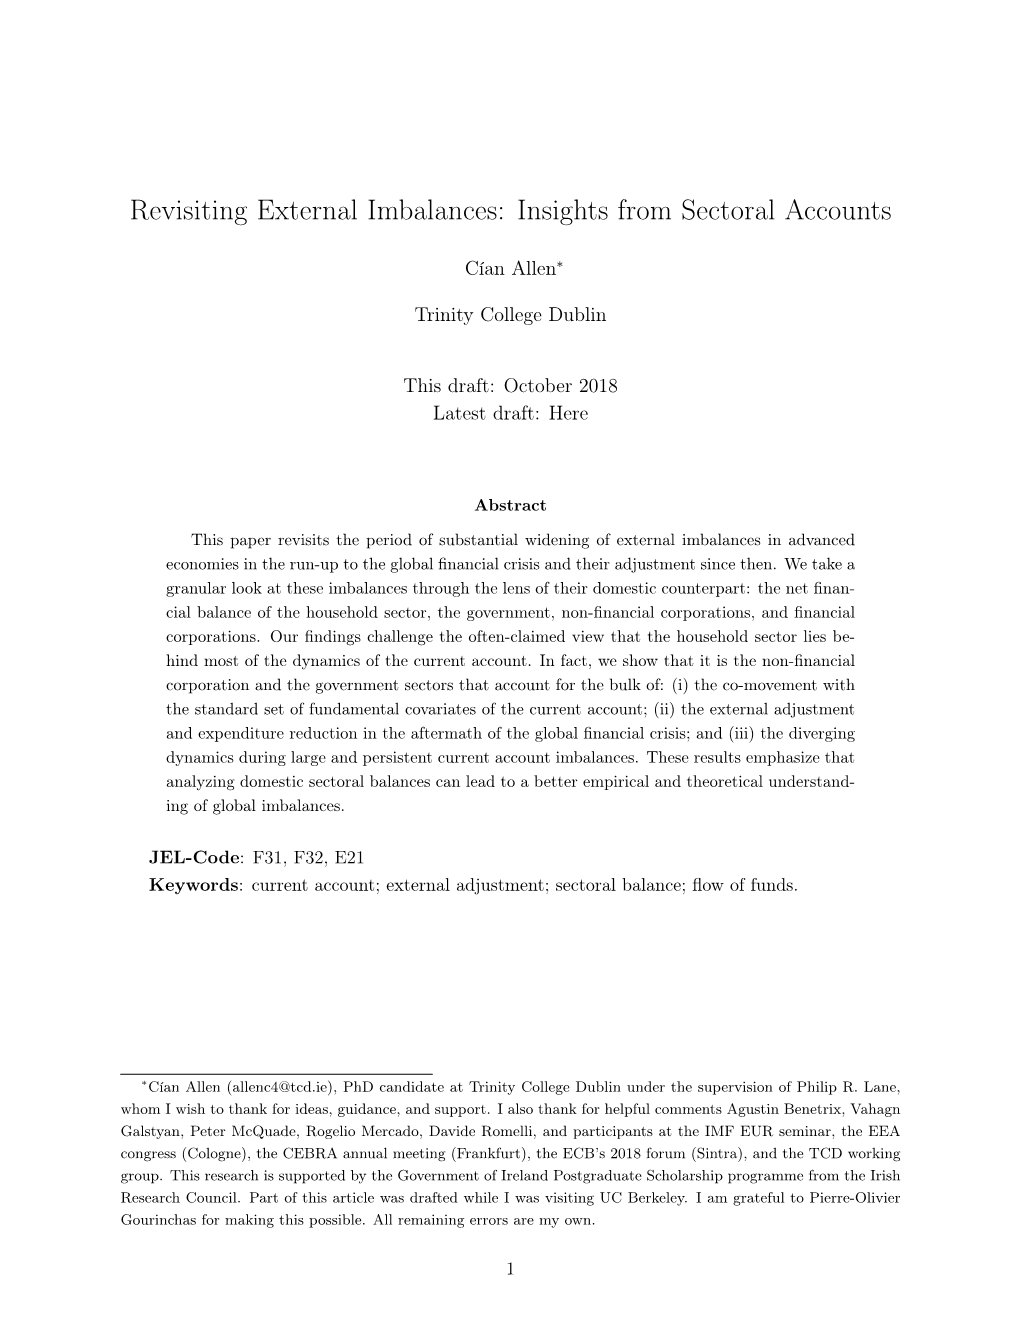 Revisiting External Imbalances: Insights from Sectoral Accounts